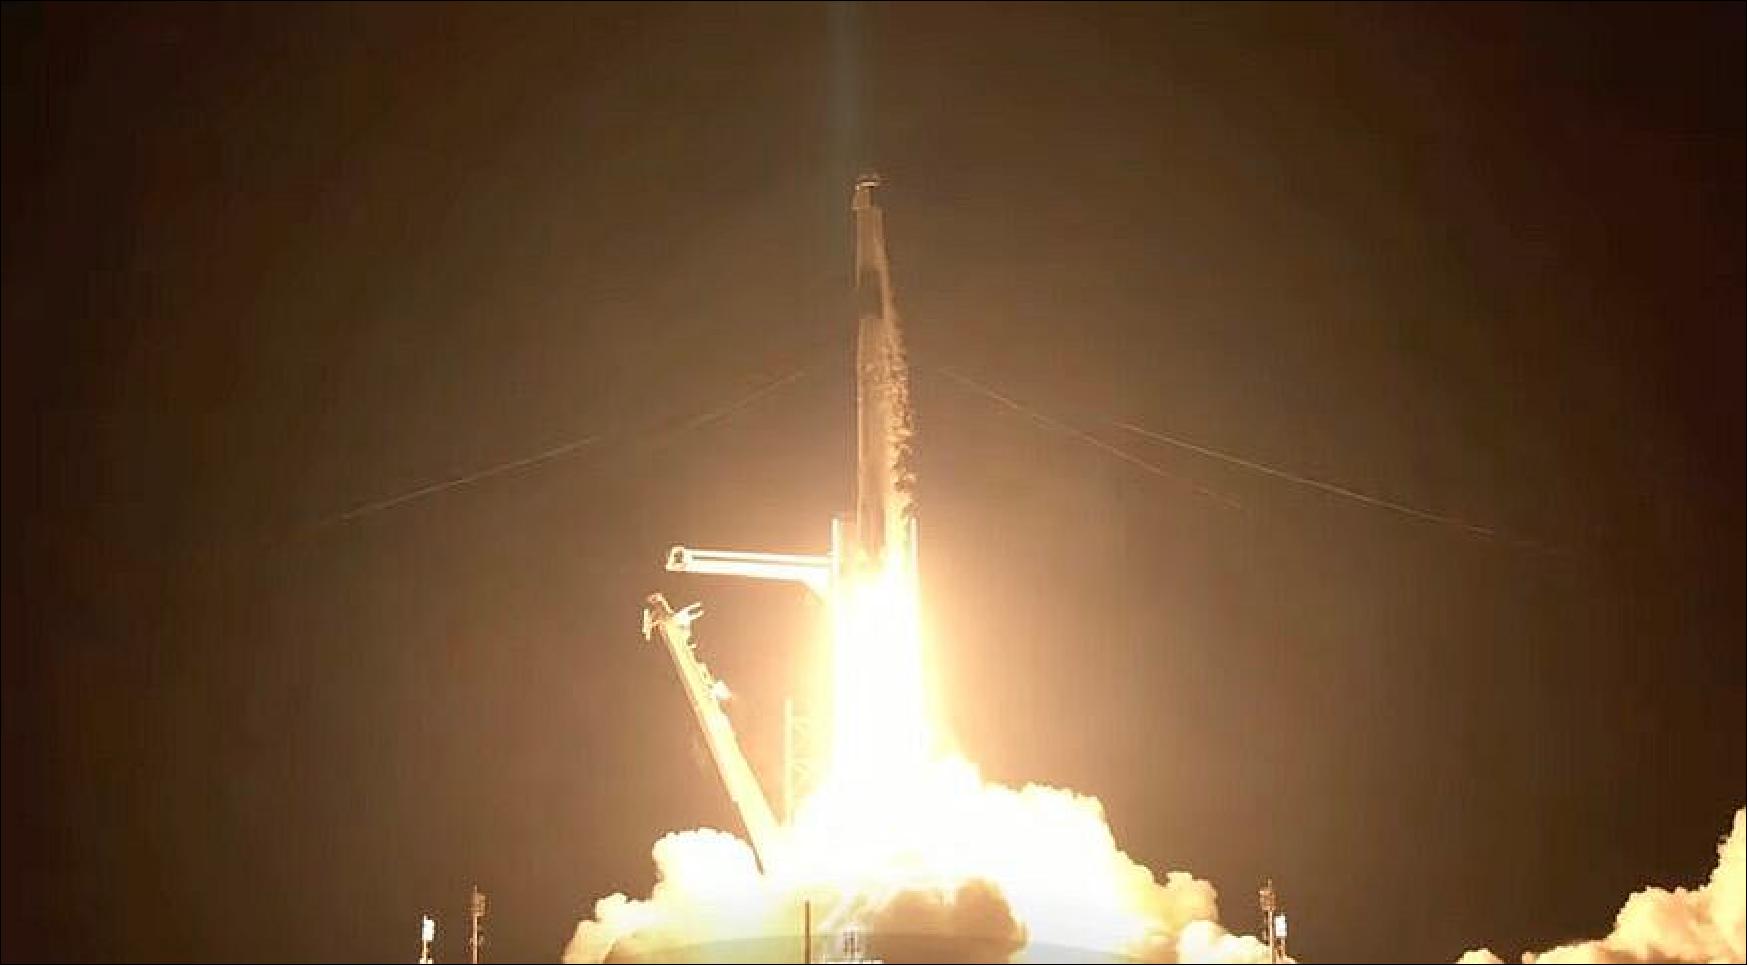 Figure 5: A SpaceX Falcon 9 lifts off Sept. 15 carrying a Crew Dragon spacecraft with four people on board for the Inspiration4 private mission (image credit: SpaceX webcast)